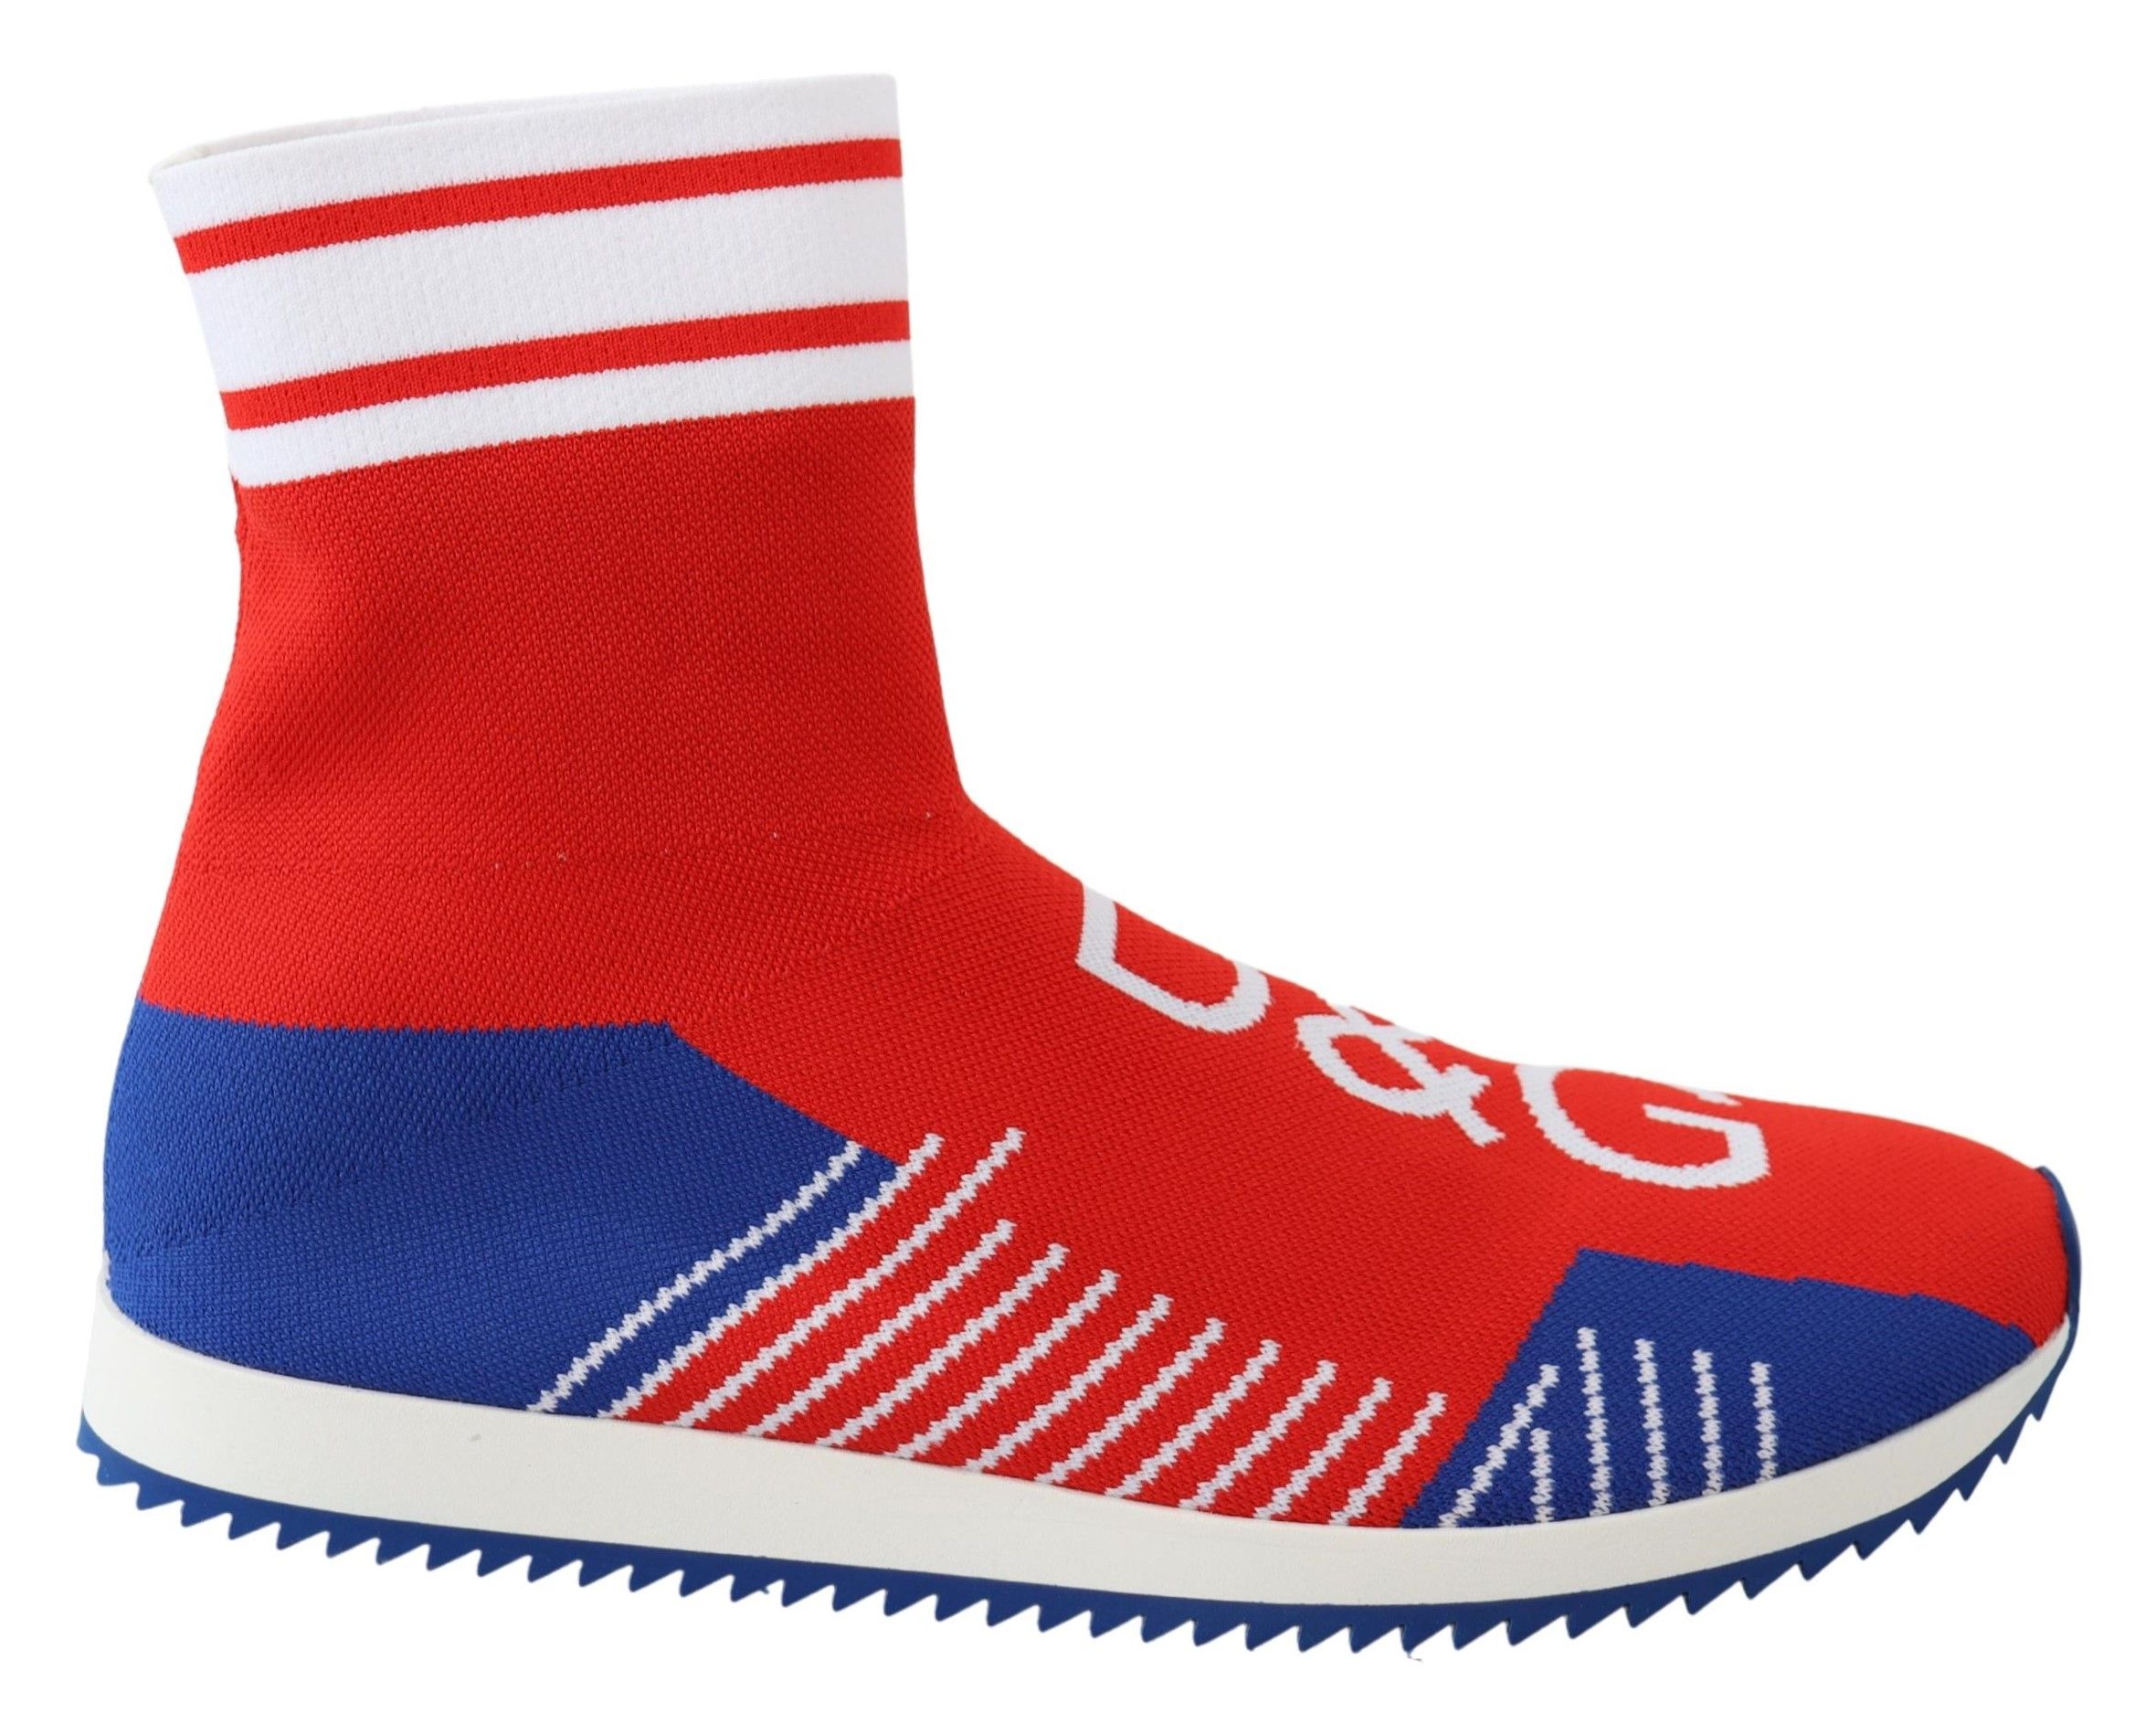 Dolce & Gabbana
Gorgeous brand new with tags, 100% AuthenticDolce & GabbanaMens shoes.
Model: SORRENTO, Casual socks sneakers
Color: Blue and red
Material:100% Polyester PL
Sole: Rubber
Logo details
Made in Italy
Very exclusive and high craftsmanship